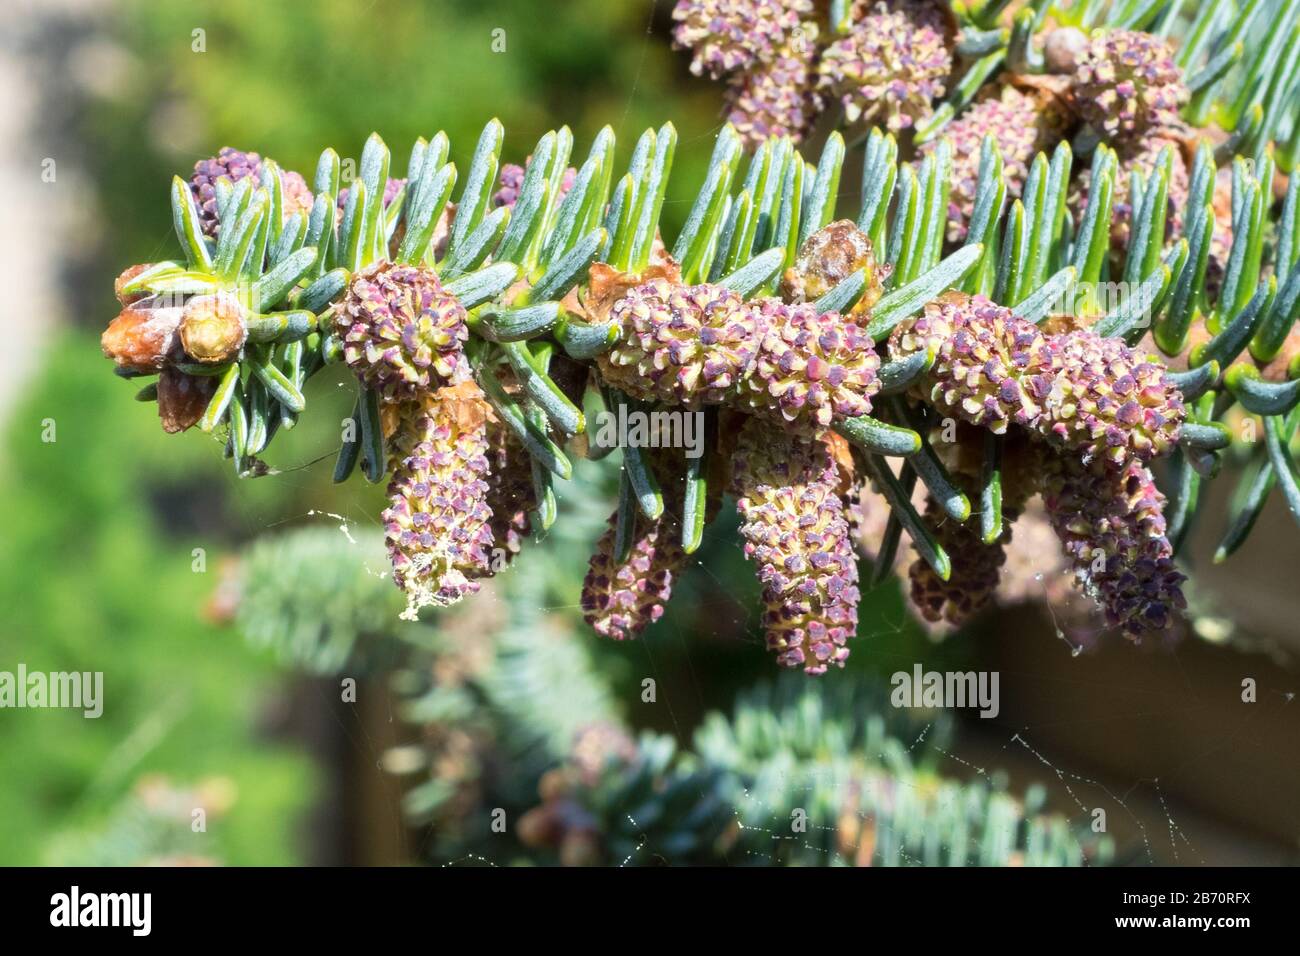 Abies pinsapo (Spanish fir) with ripe purple colored male cones and yellow pollen. Stock Photo